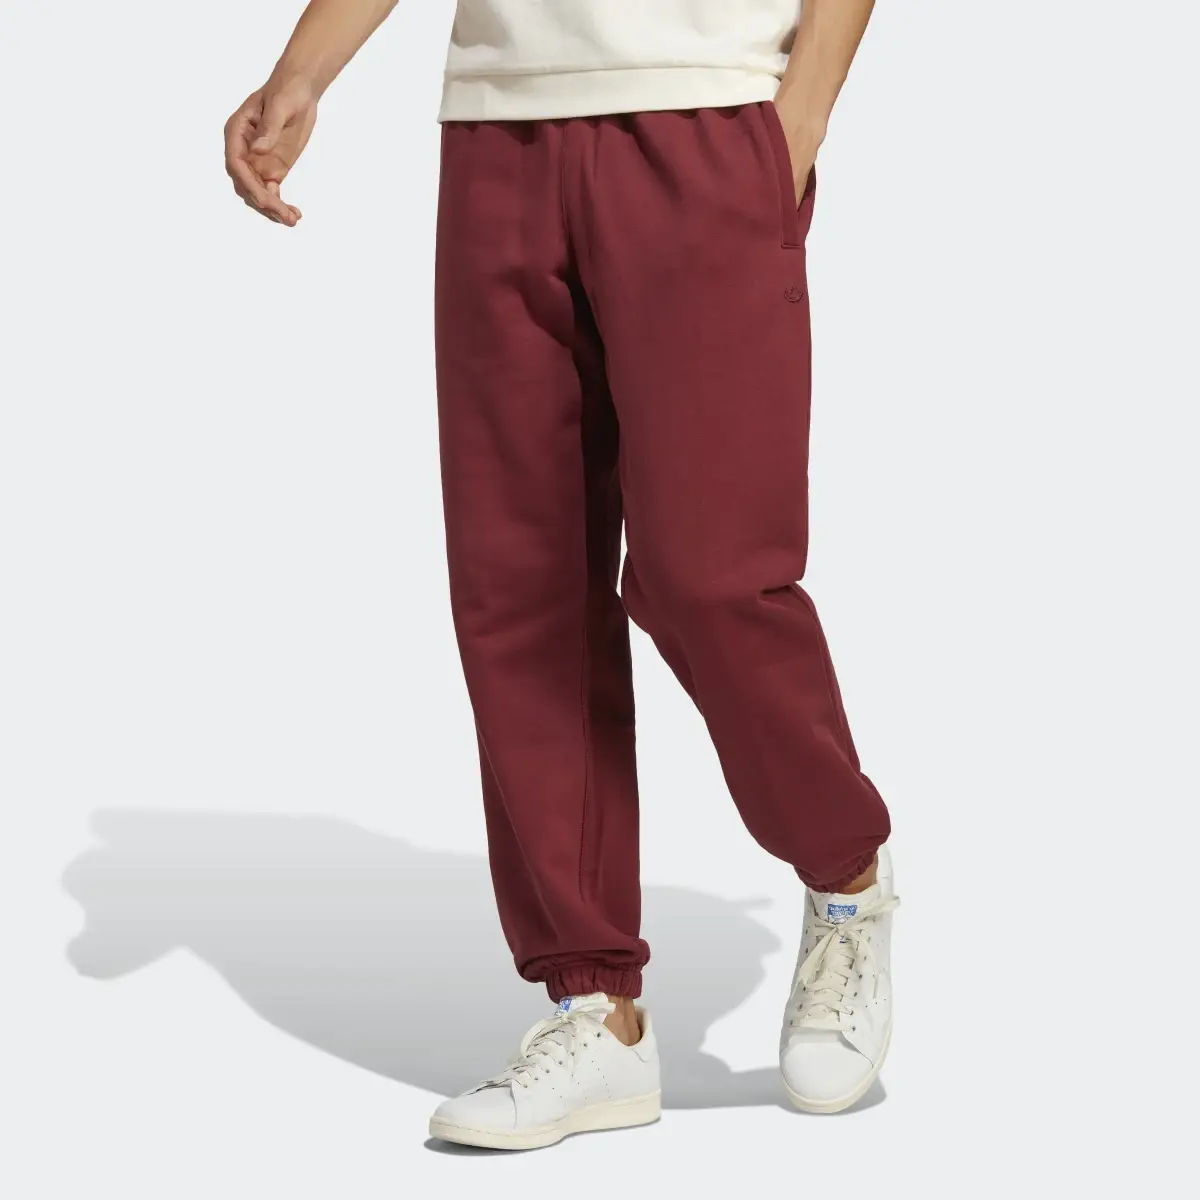 Adidas Adicolor Contempo French Terry Joggers. 1